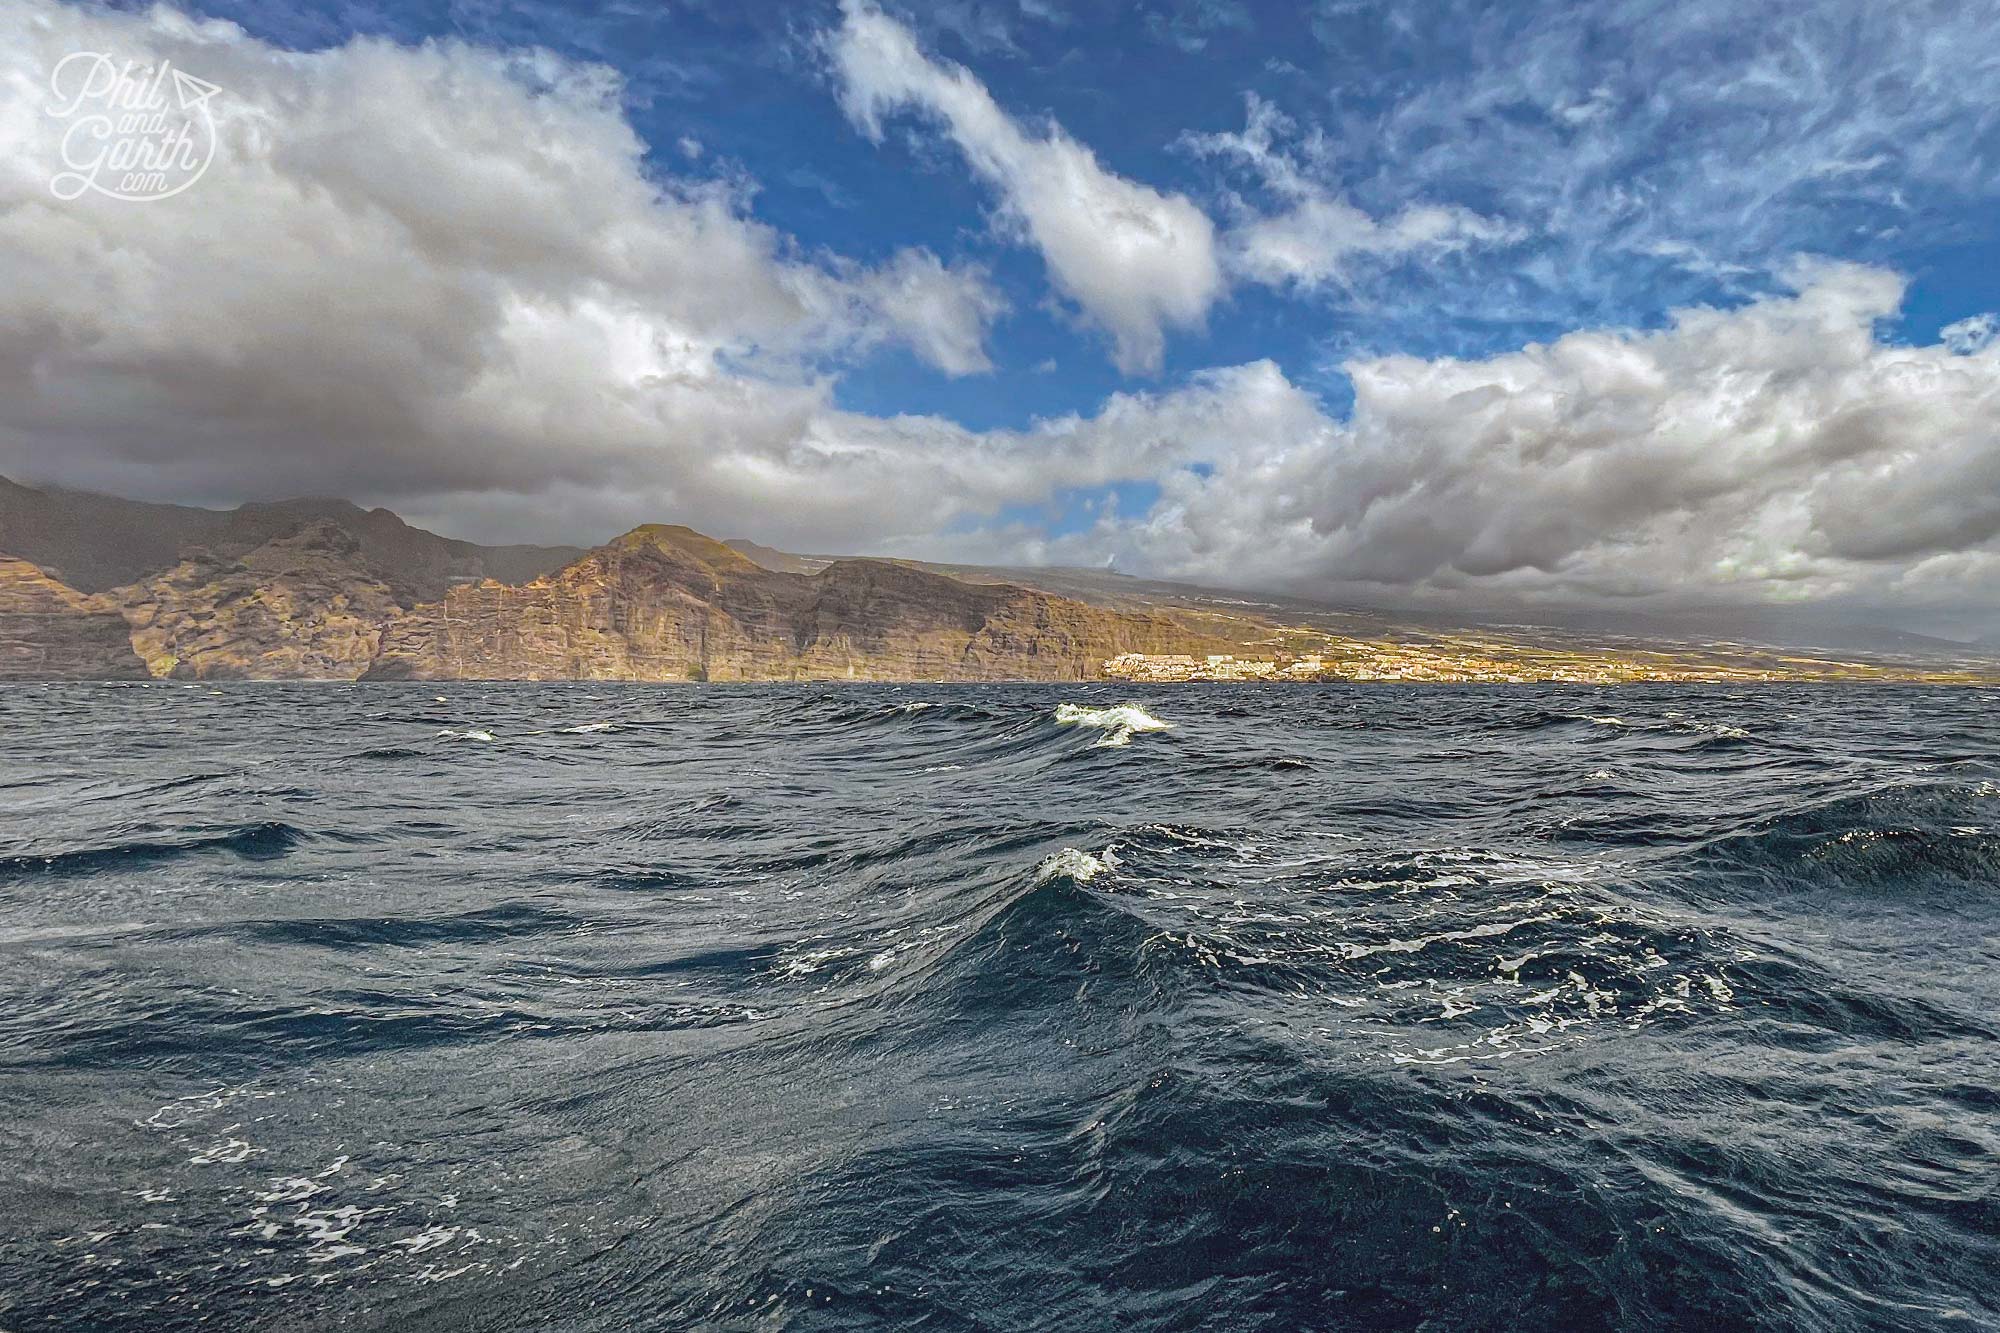 Los Gigantes is a hotspot for dolphin and whale watching boat trips